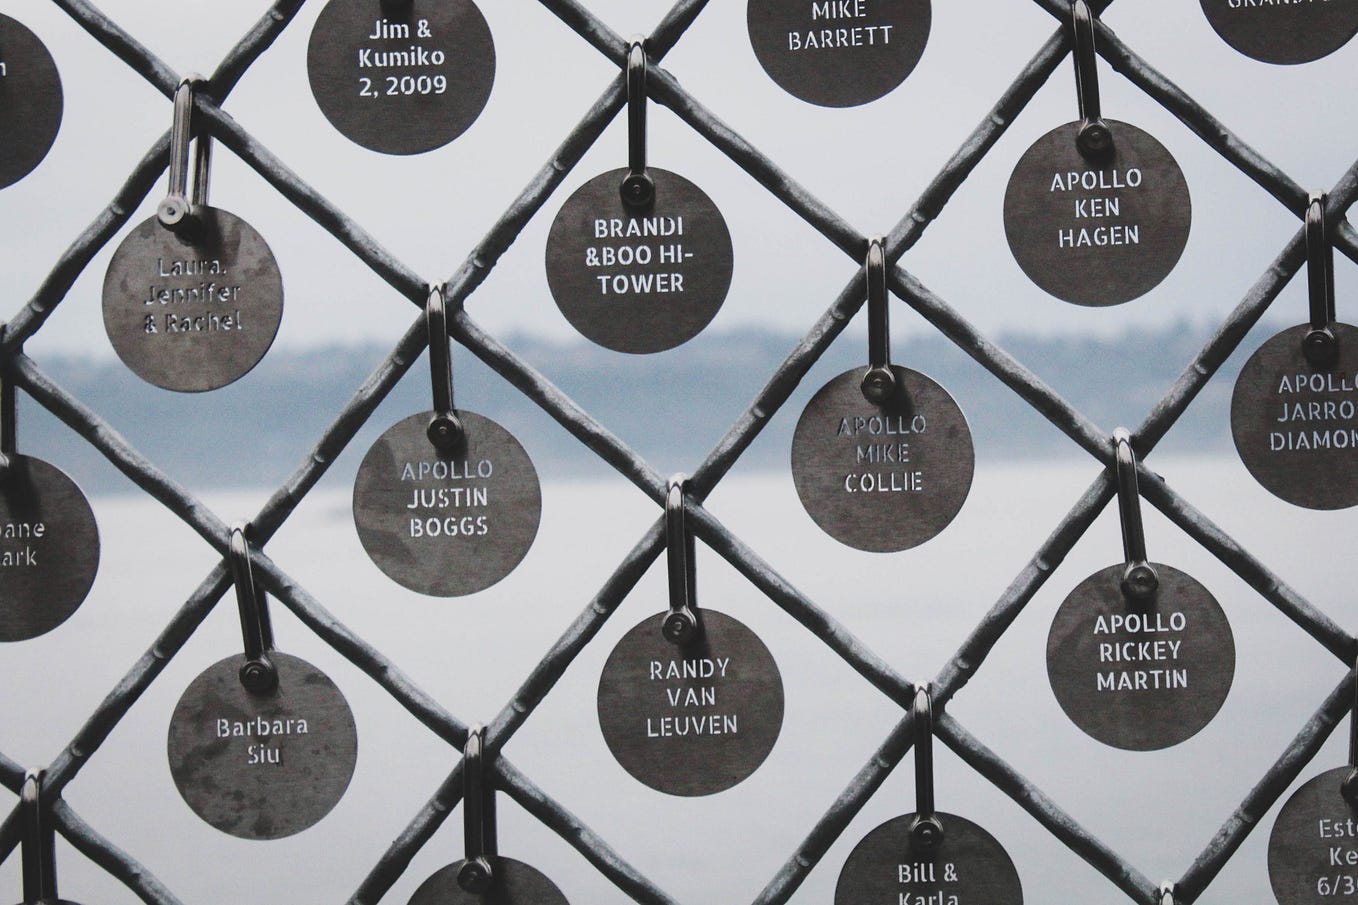 A cool picture of names on pendants dangling from a chain-link fence.